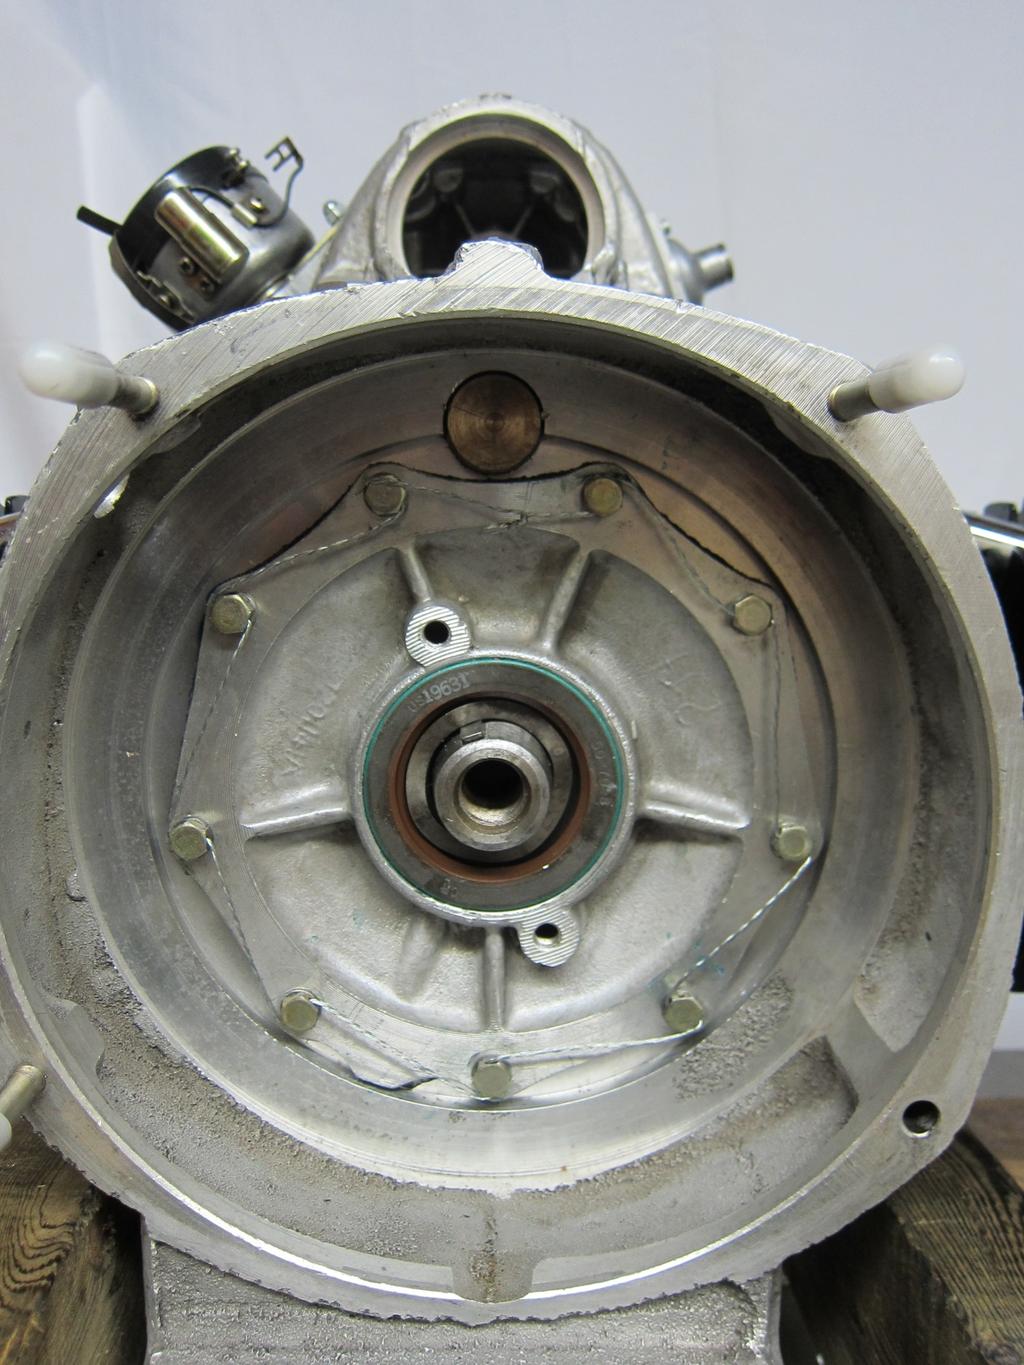 Figure 5 - Rear crankshaft bearing plate showing safety wire